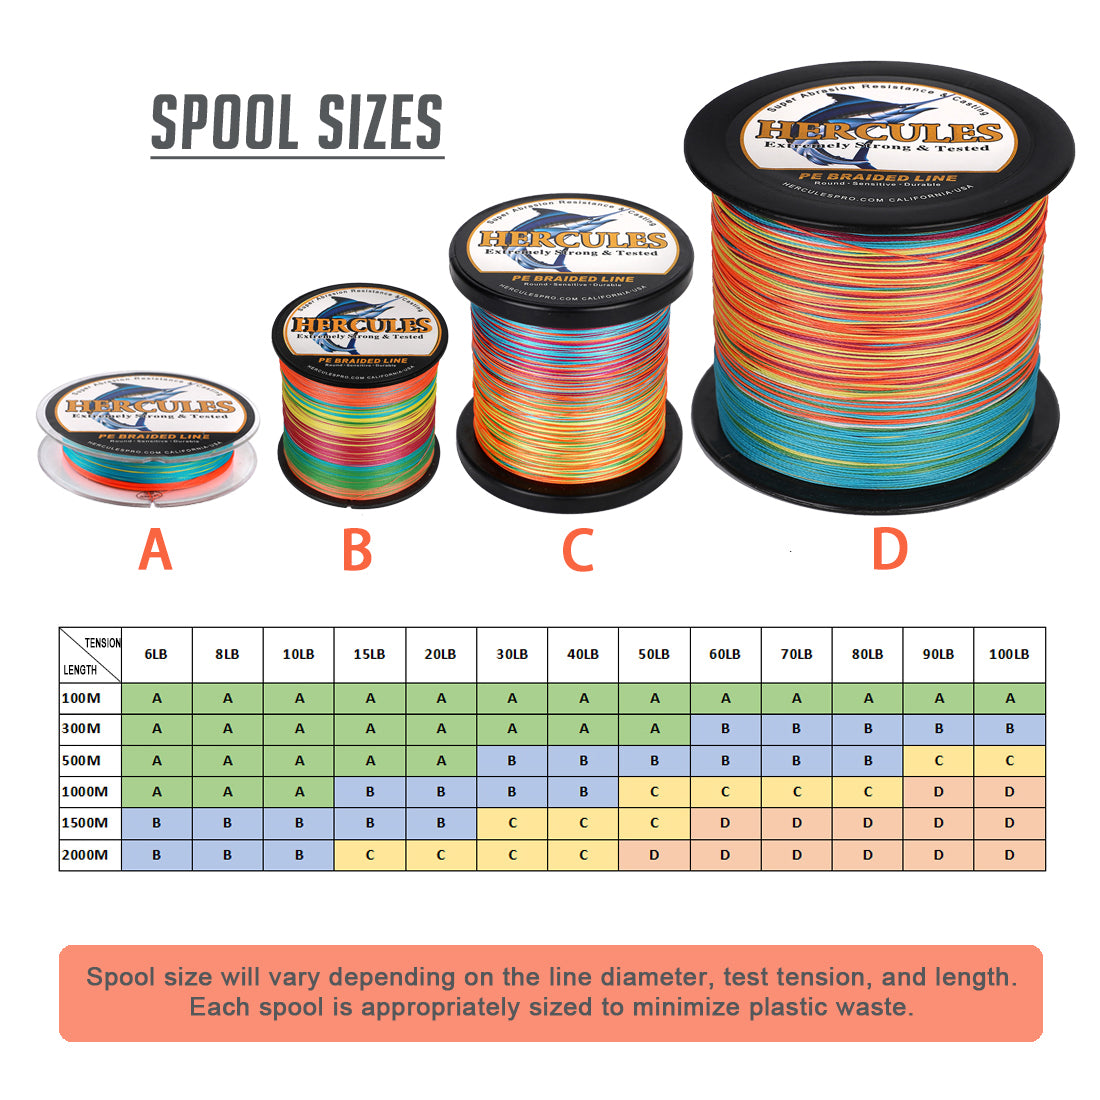 SPOOLING BRAID PROPERLY  Active Angling New Zealand